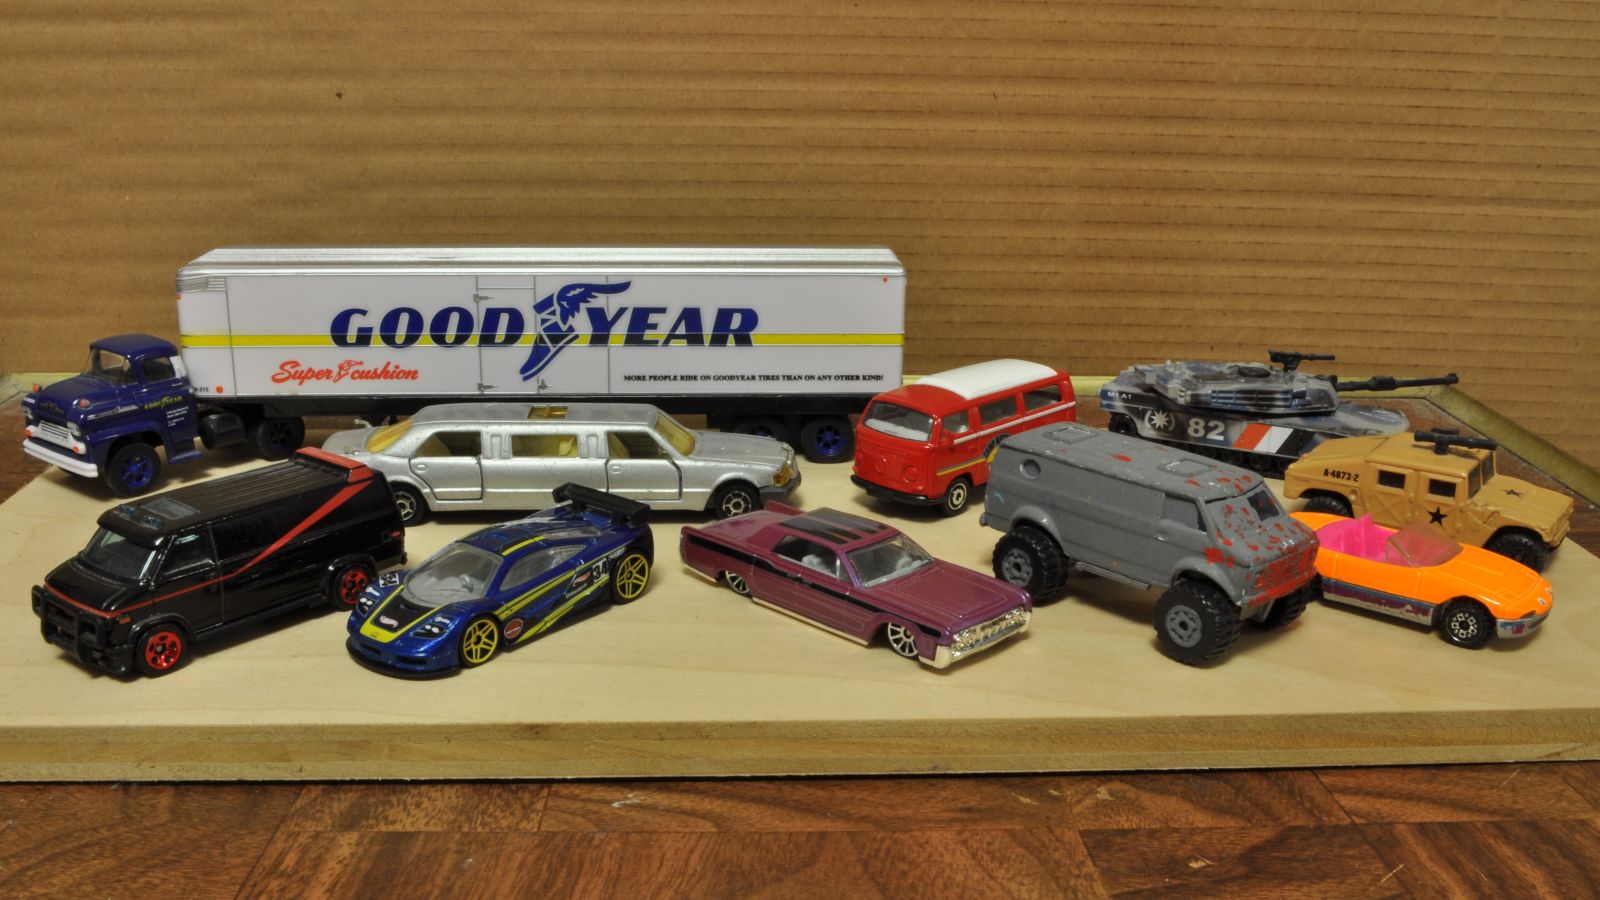 Illustration for article titled Chasing DieCast Cars (Week Ending August 24, 2014)